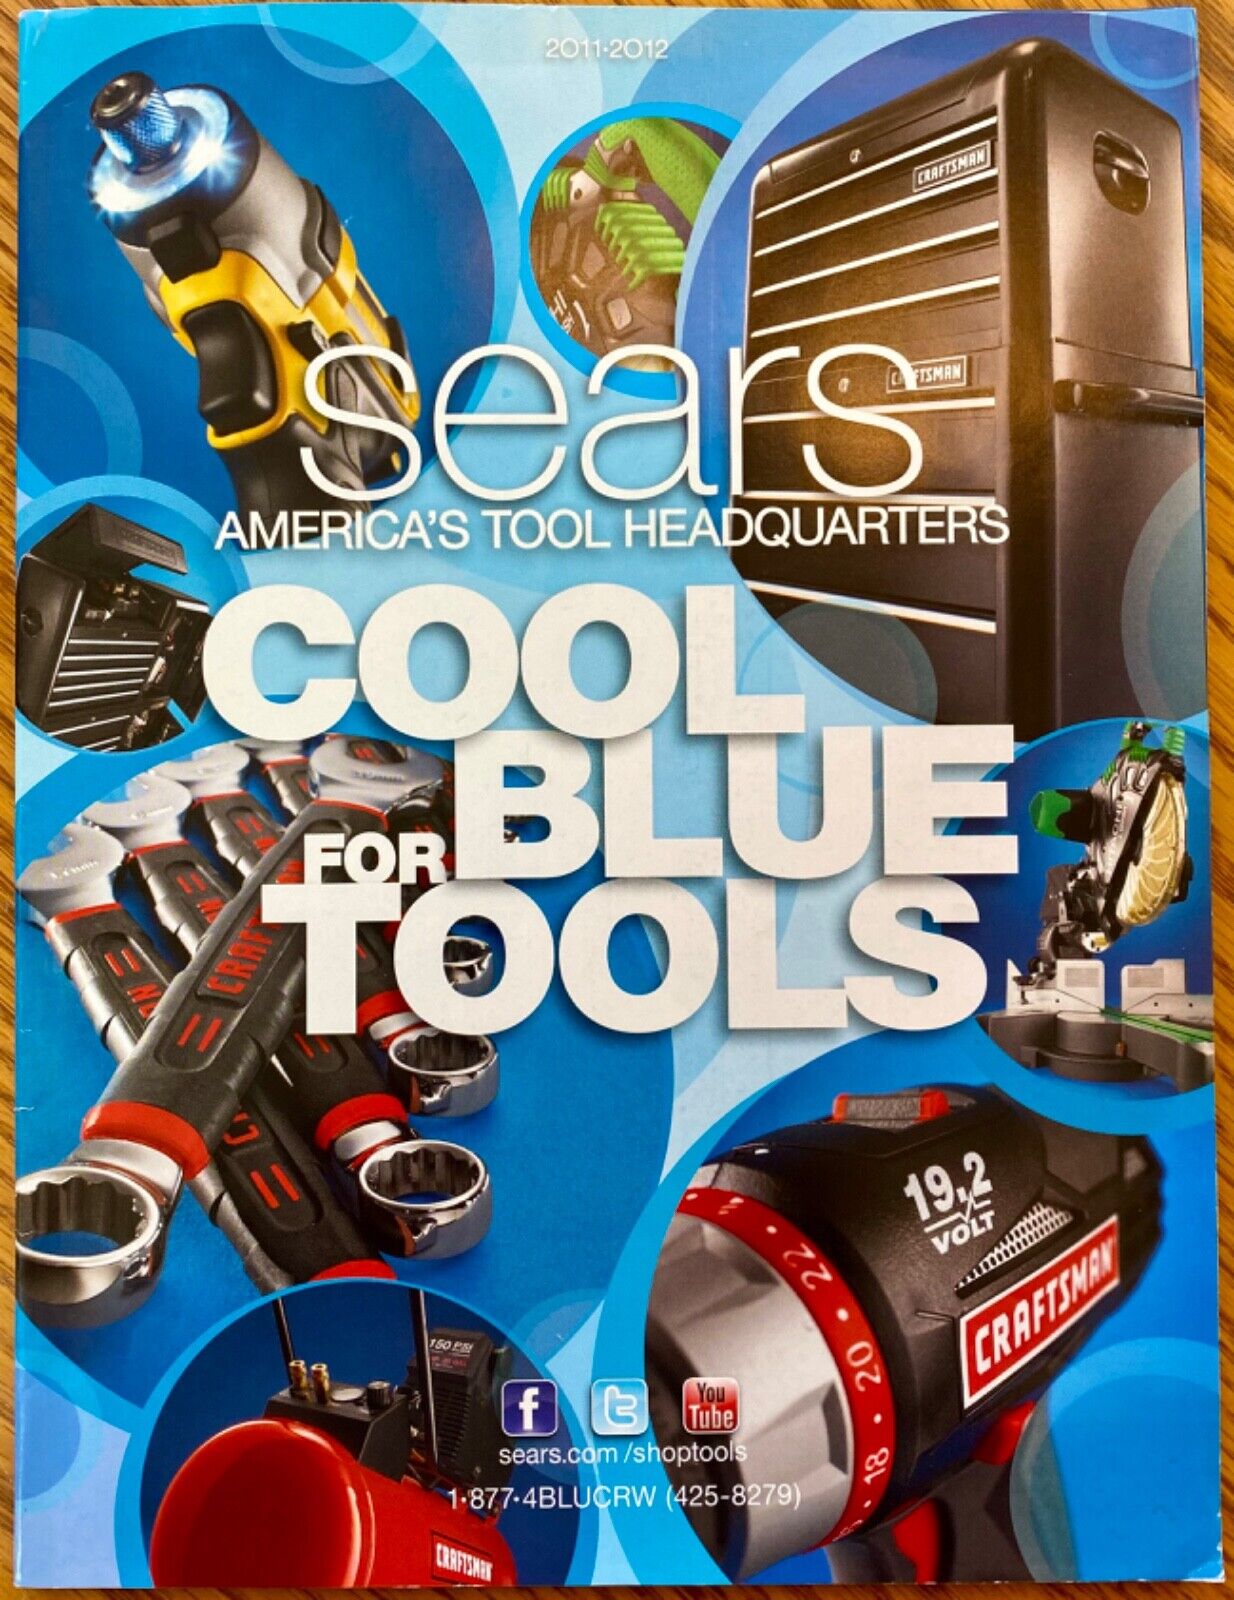 Sears Craftsman 2011-2012 Power and Hand Tools Catalog.1, 191 pages